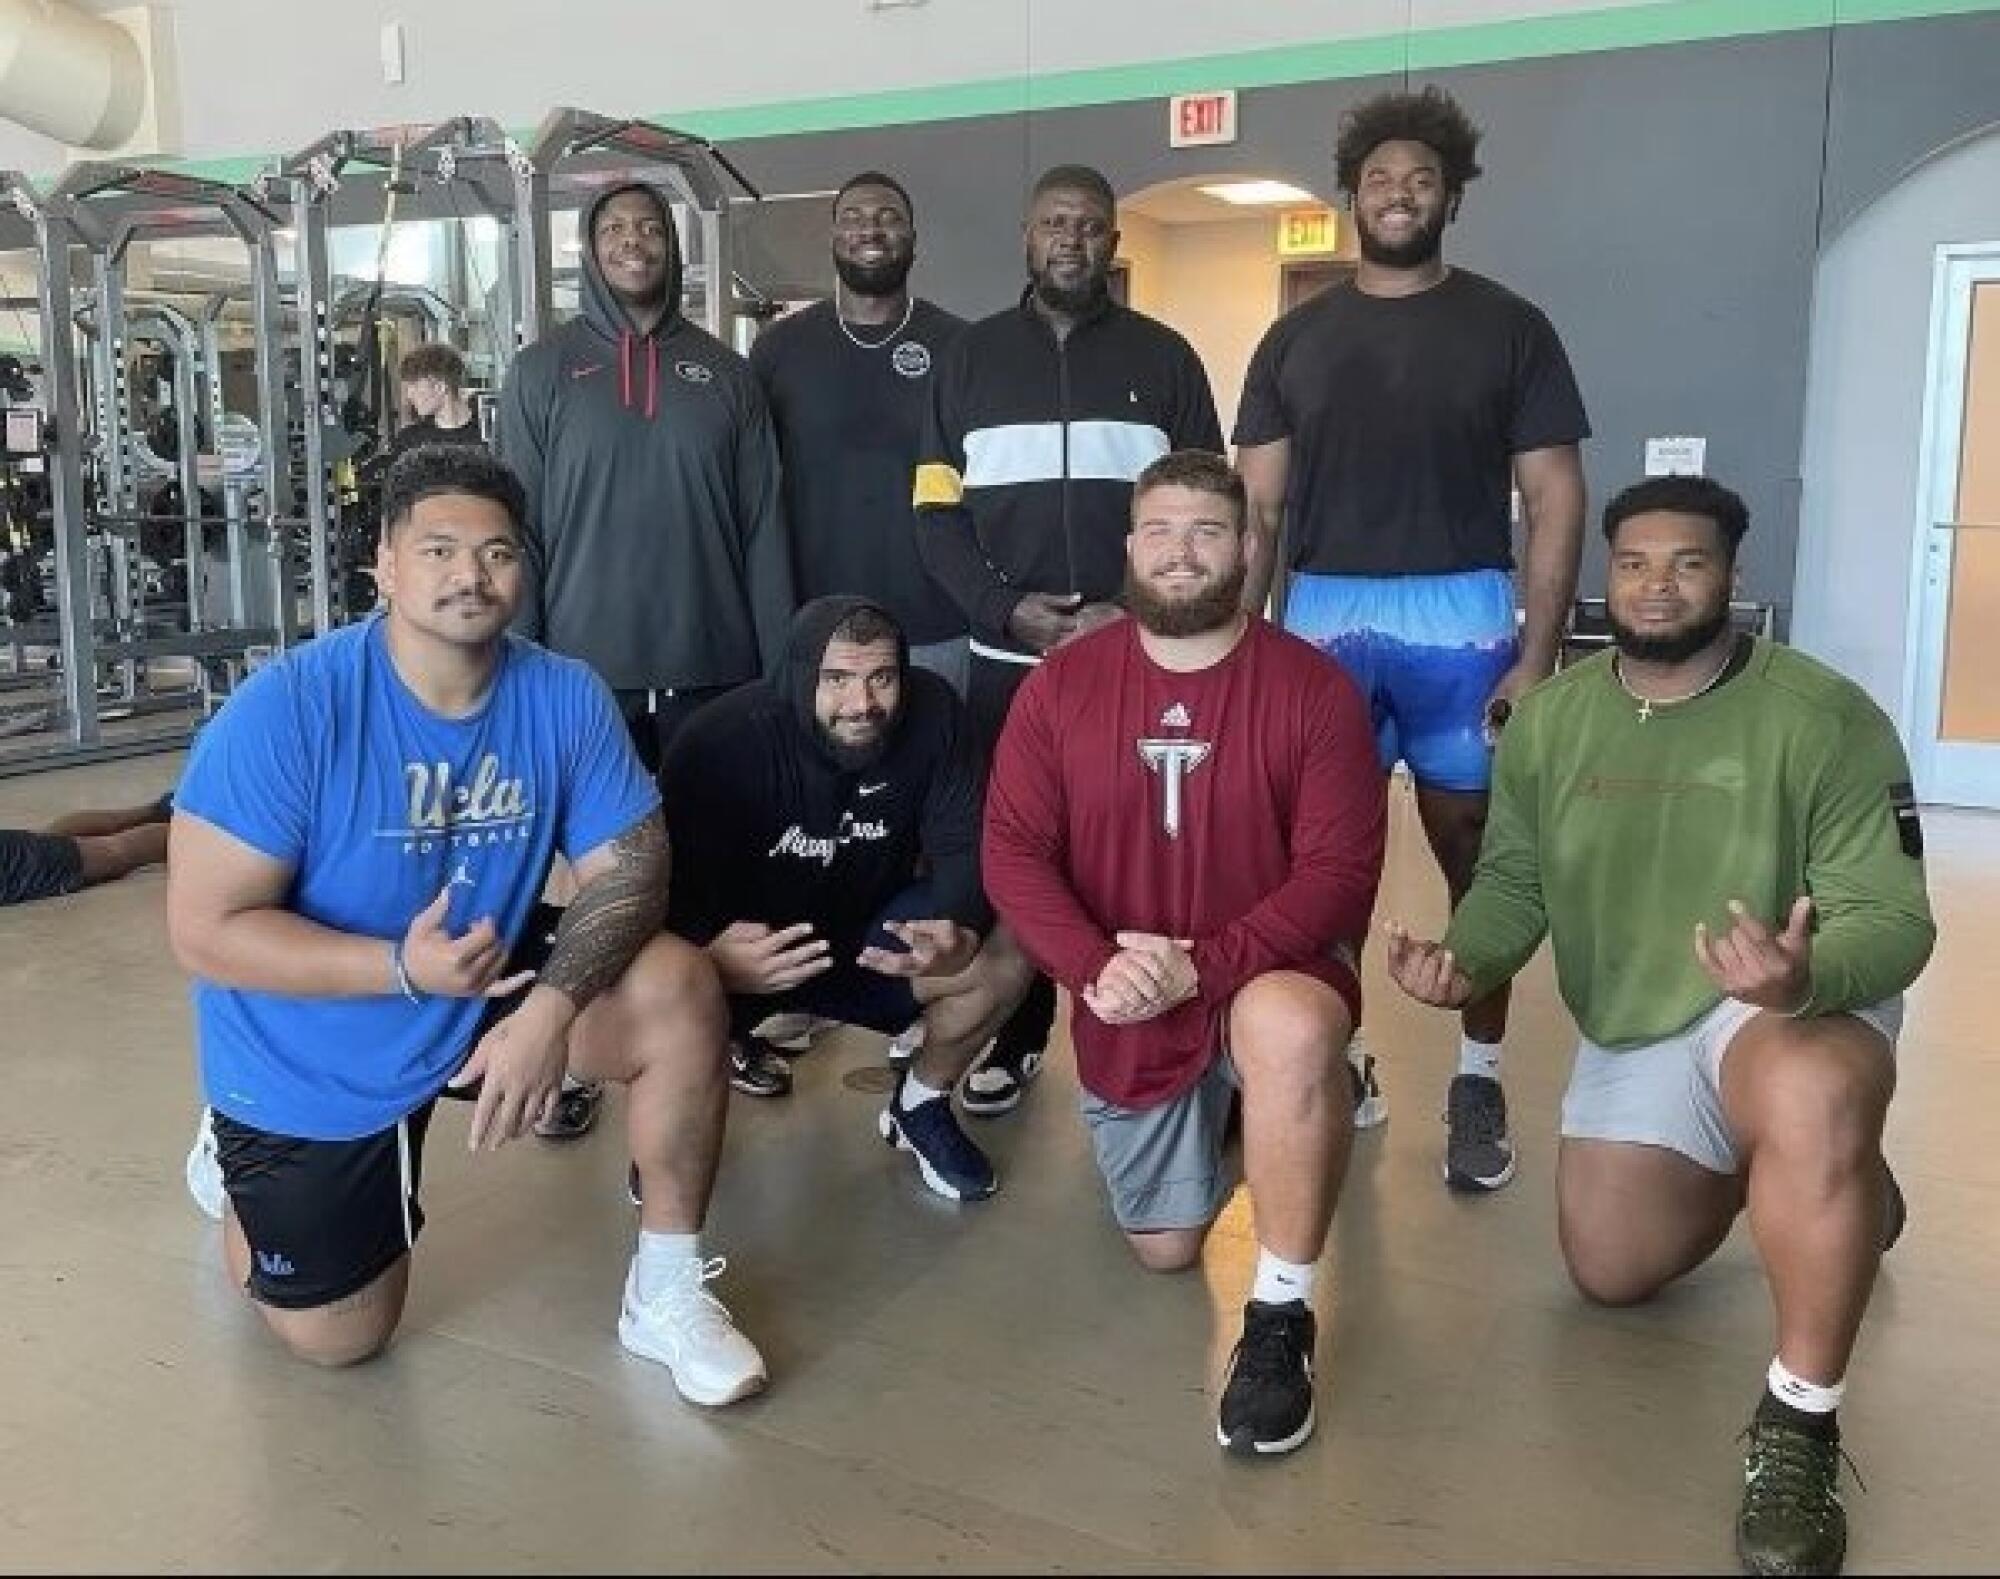 Atonio Mafi wears a UCLA shirt while posing with people he met while training for the NFL draft.